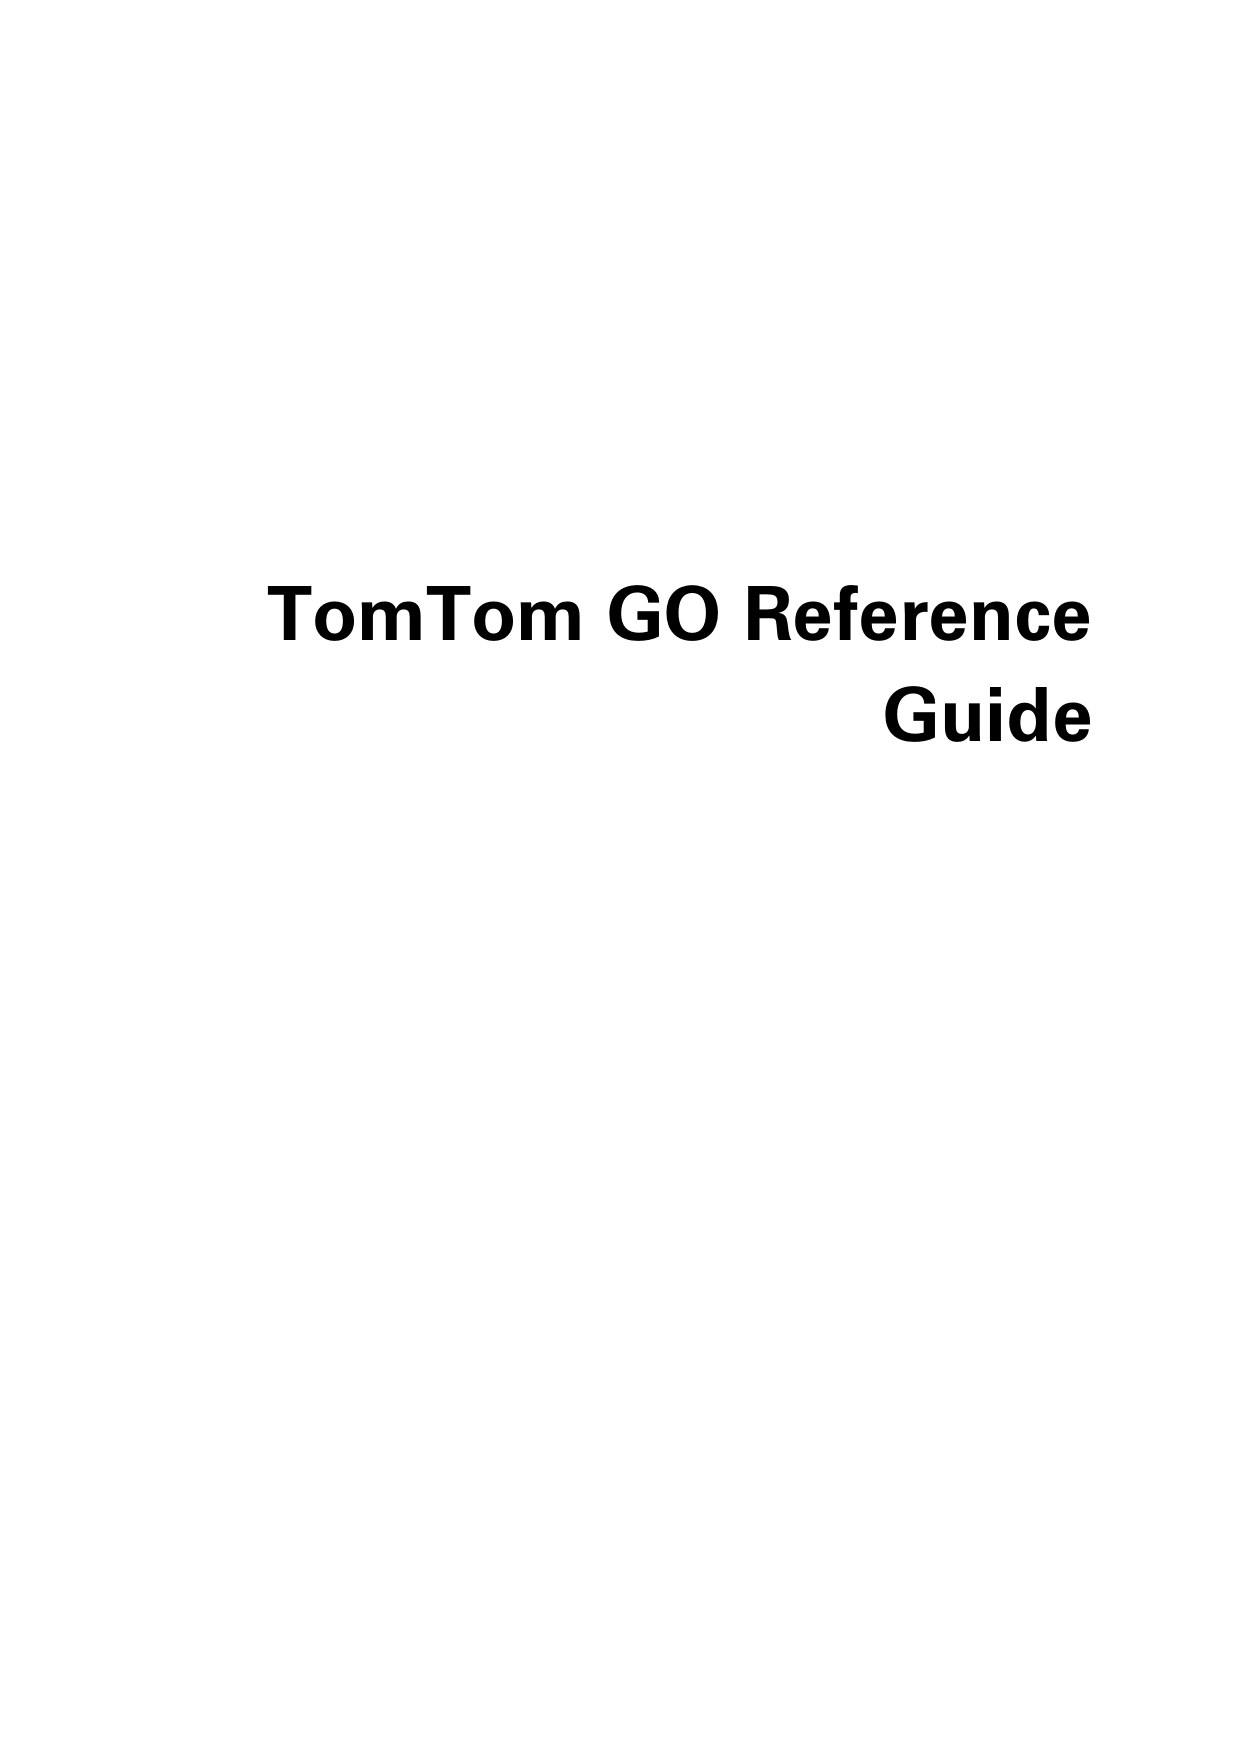   TomTom GO Reference Guide  